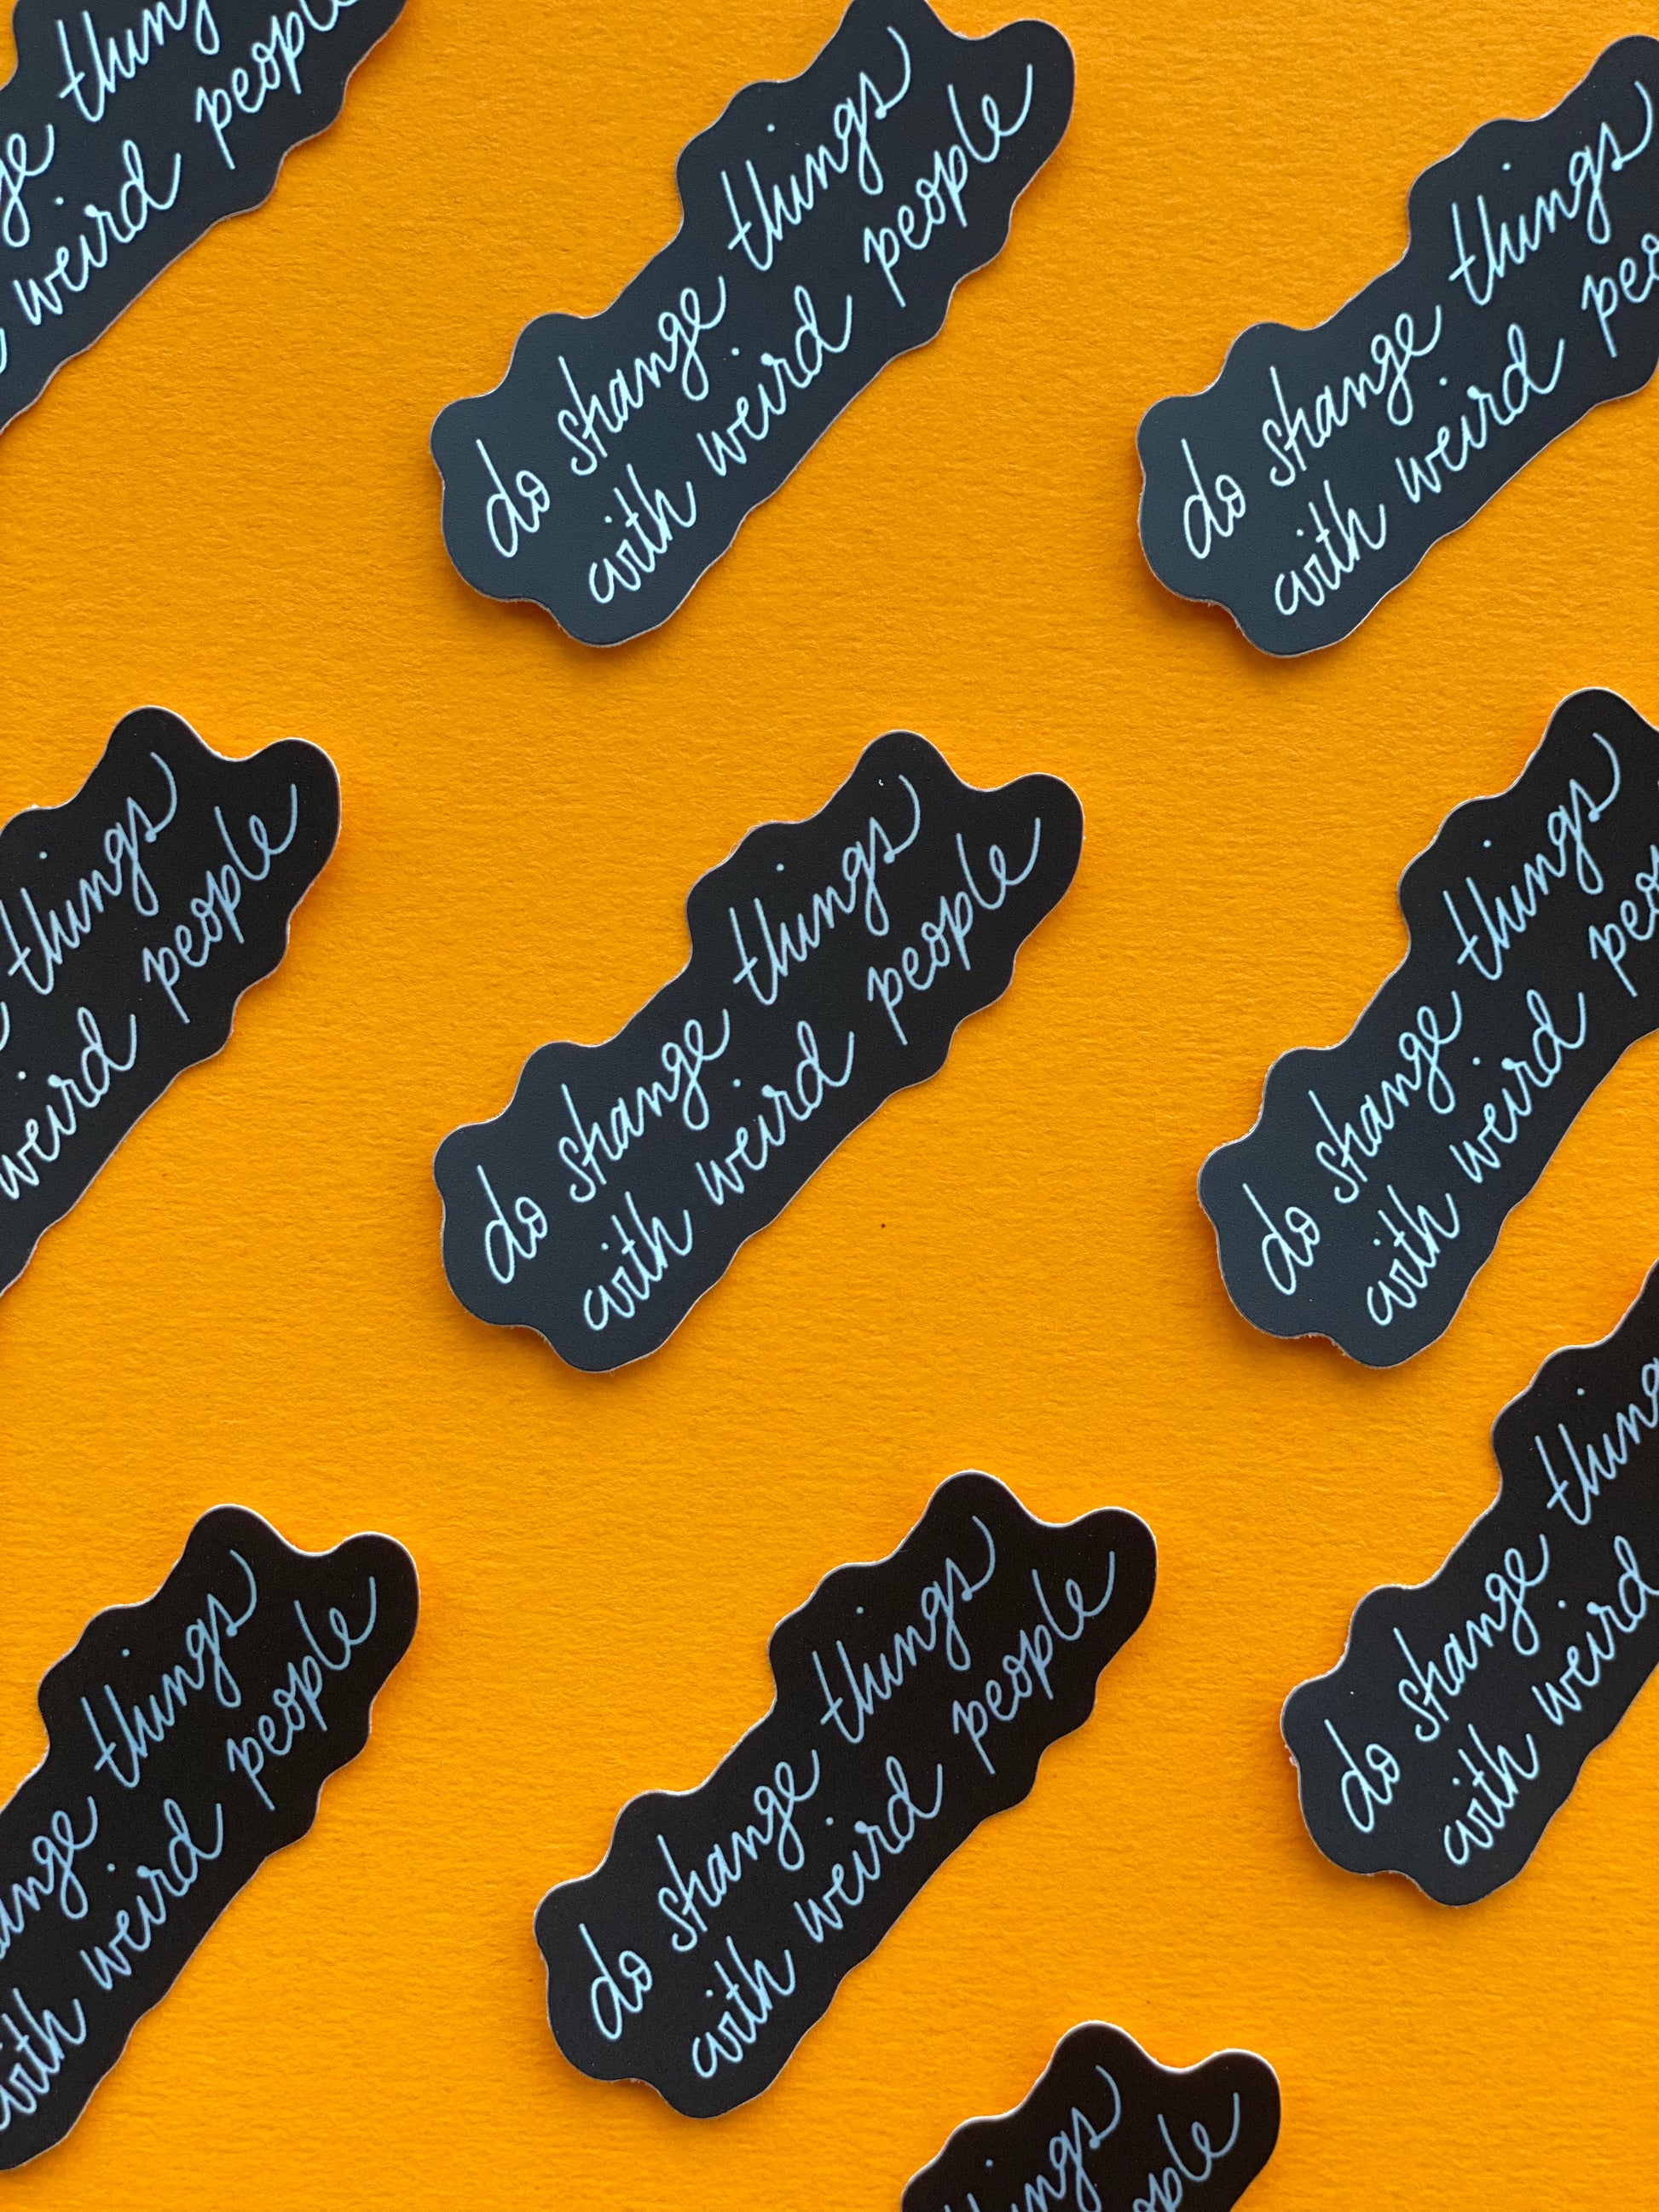 A handful of black stickers with silver text that says "do strange things with weird people" on a bright orange background.